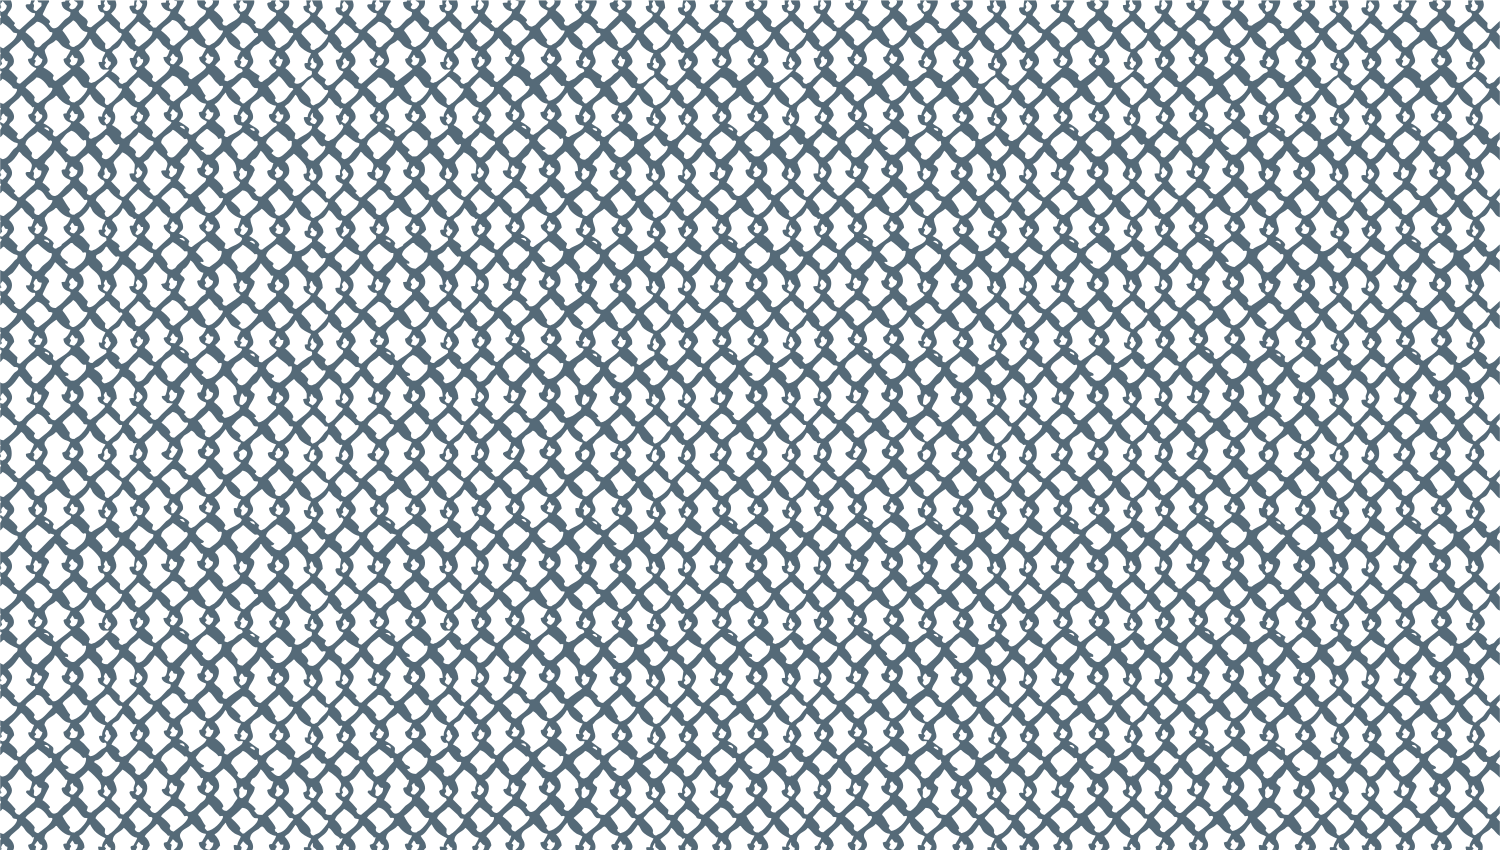 Parasoleil™ Bronx Blue© pattern displayed with a blue color overlay